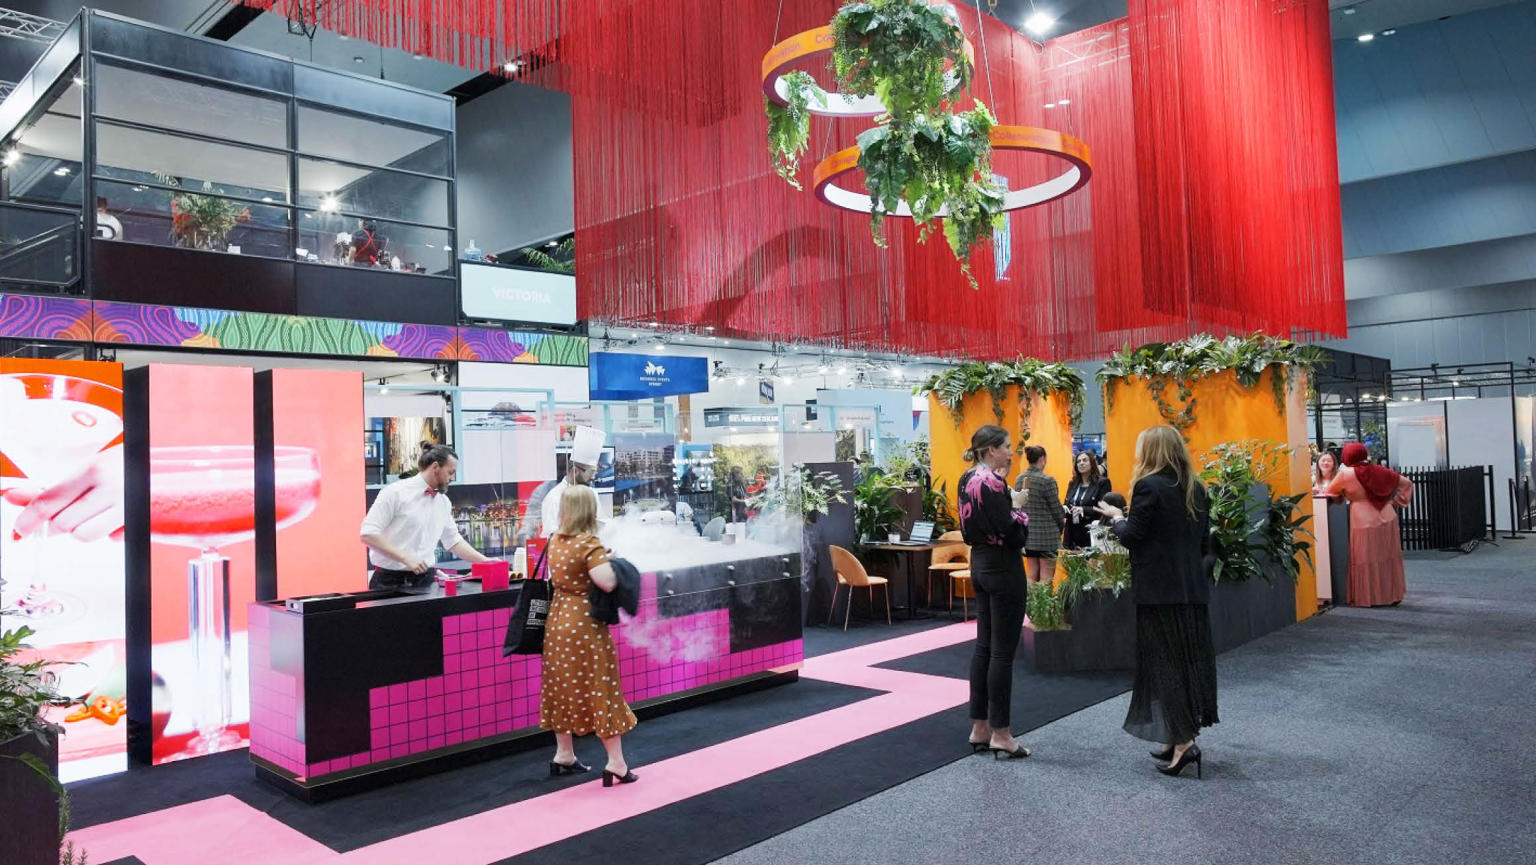 An eye-catching exhibition stand featuring various elements: long red fringing suspended from the ceiling, orange circles adorned with hanging plants, a black and pink table where a man in a white shirt serves ice cream, a captivating digital screen displaying a cocktail in a coupe glass. The stand is enhanced by black and pink carpeting, and three individuals standing nearby.